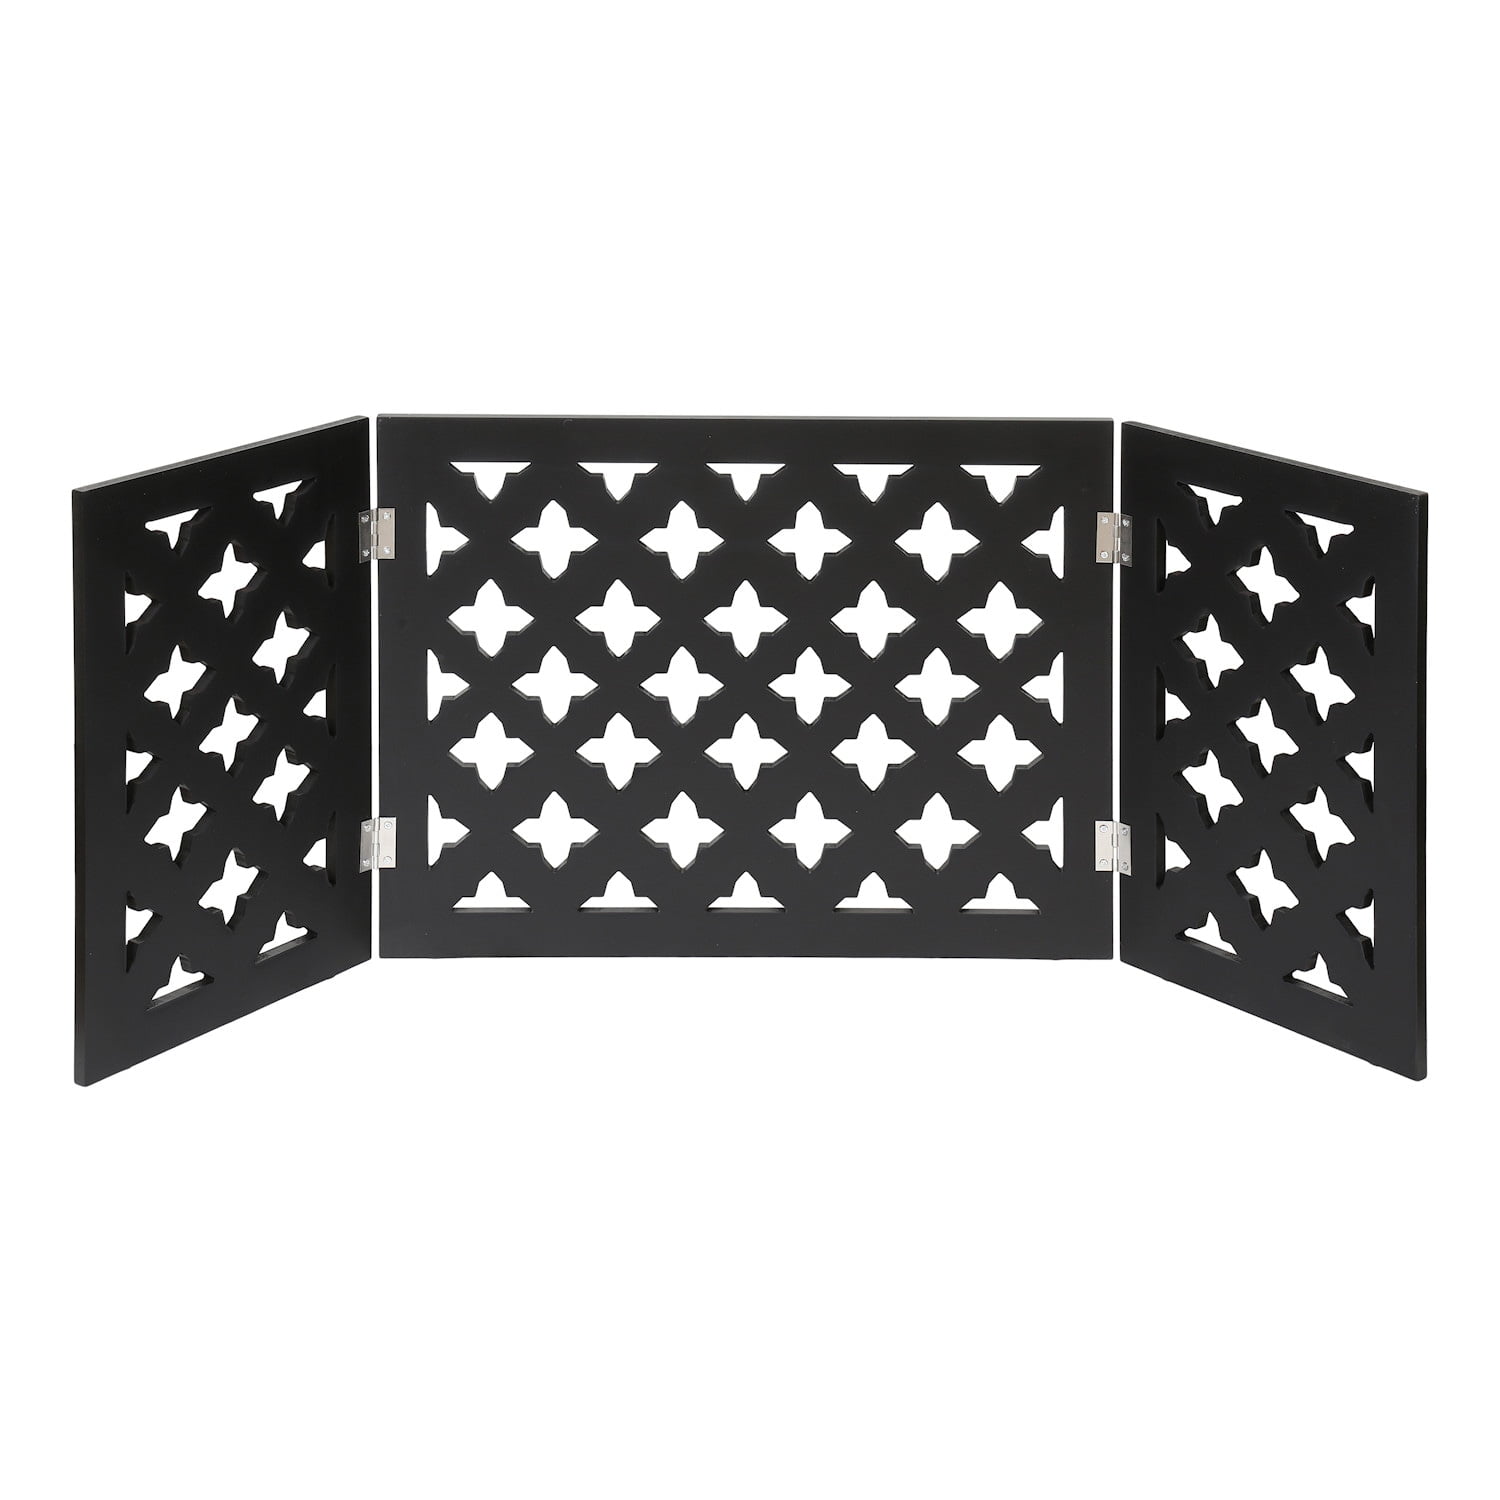 24-48 Inches Wide x 19 Inches Tall Decorative Black Tri Fold Dog Fence for Doorways Stairs Indoor/Outdoor Pet Barrier Etna 3-Panel Diamond Design Wood Pet Gate 